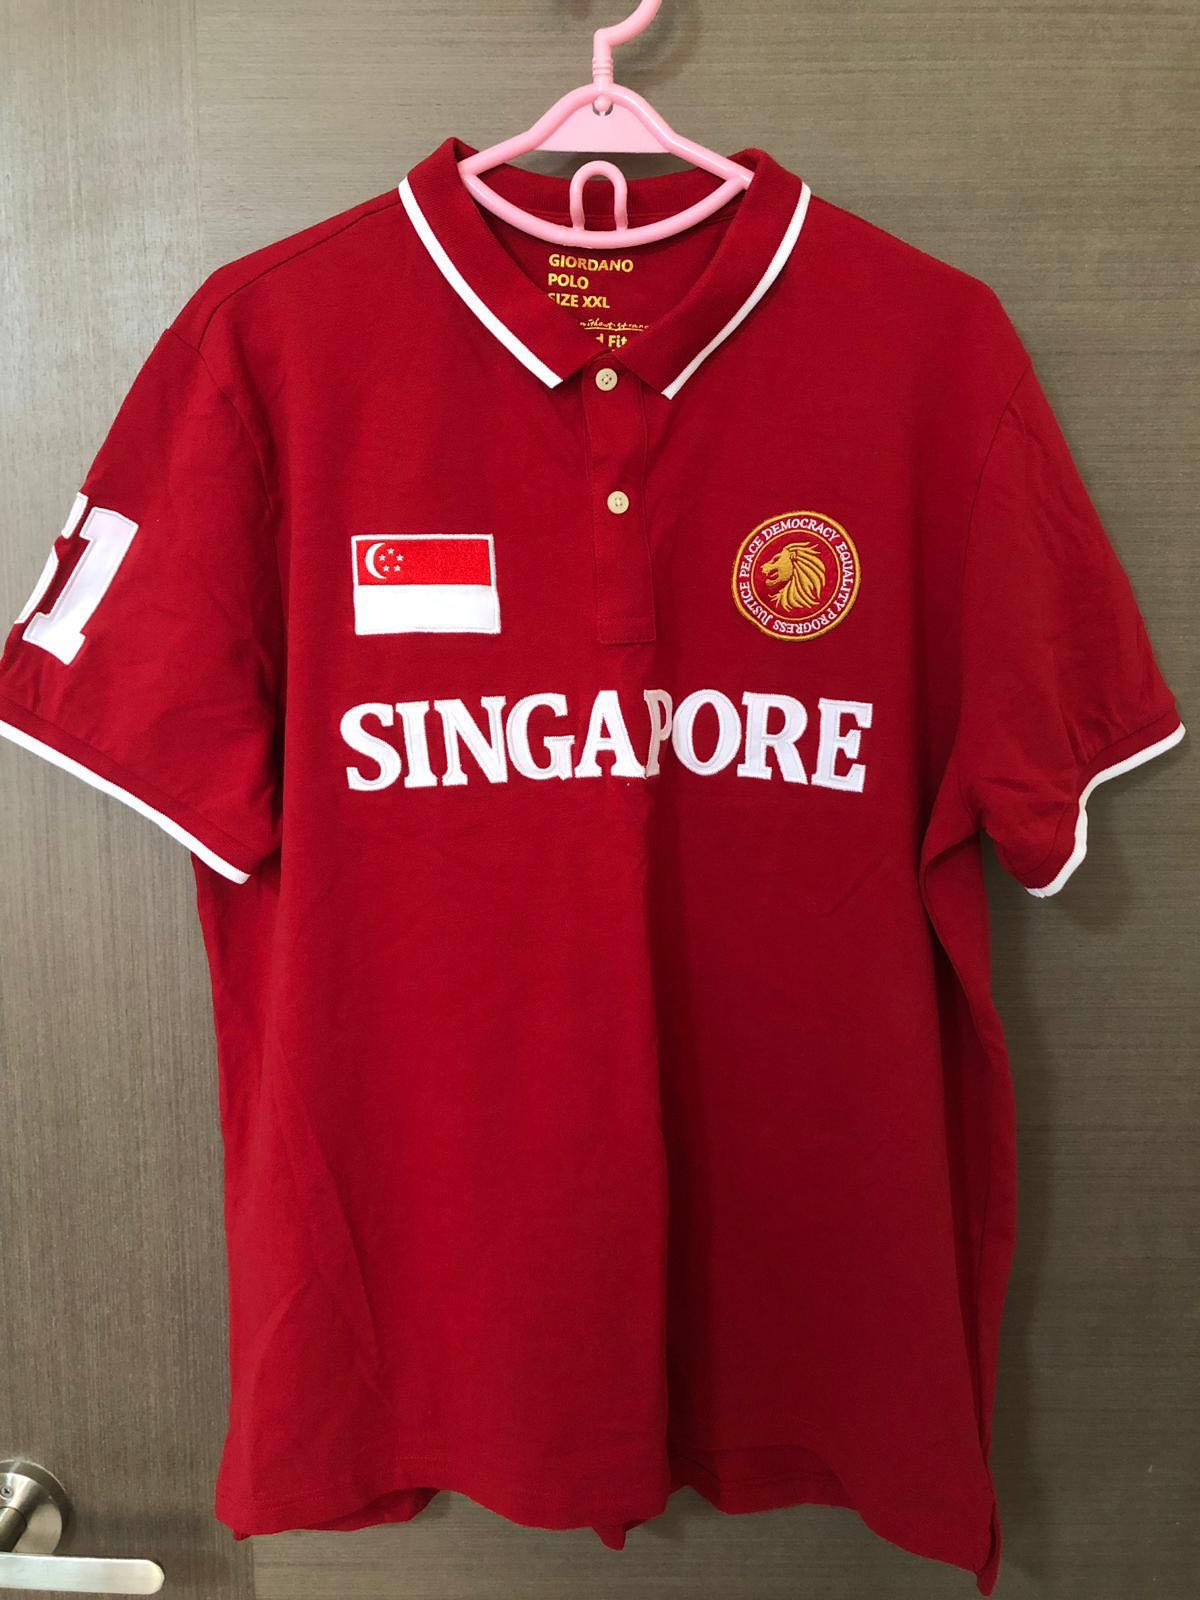  Giordano polo  T shirt red for Singapore National Day 